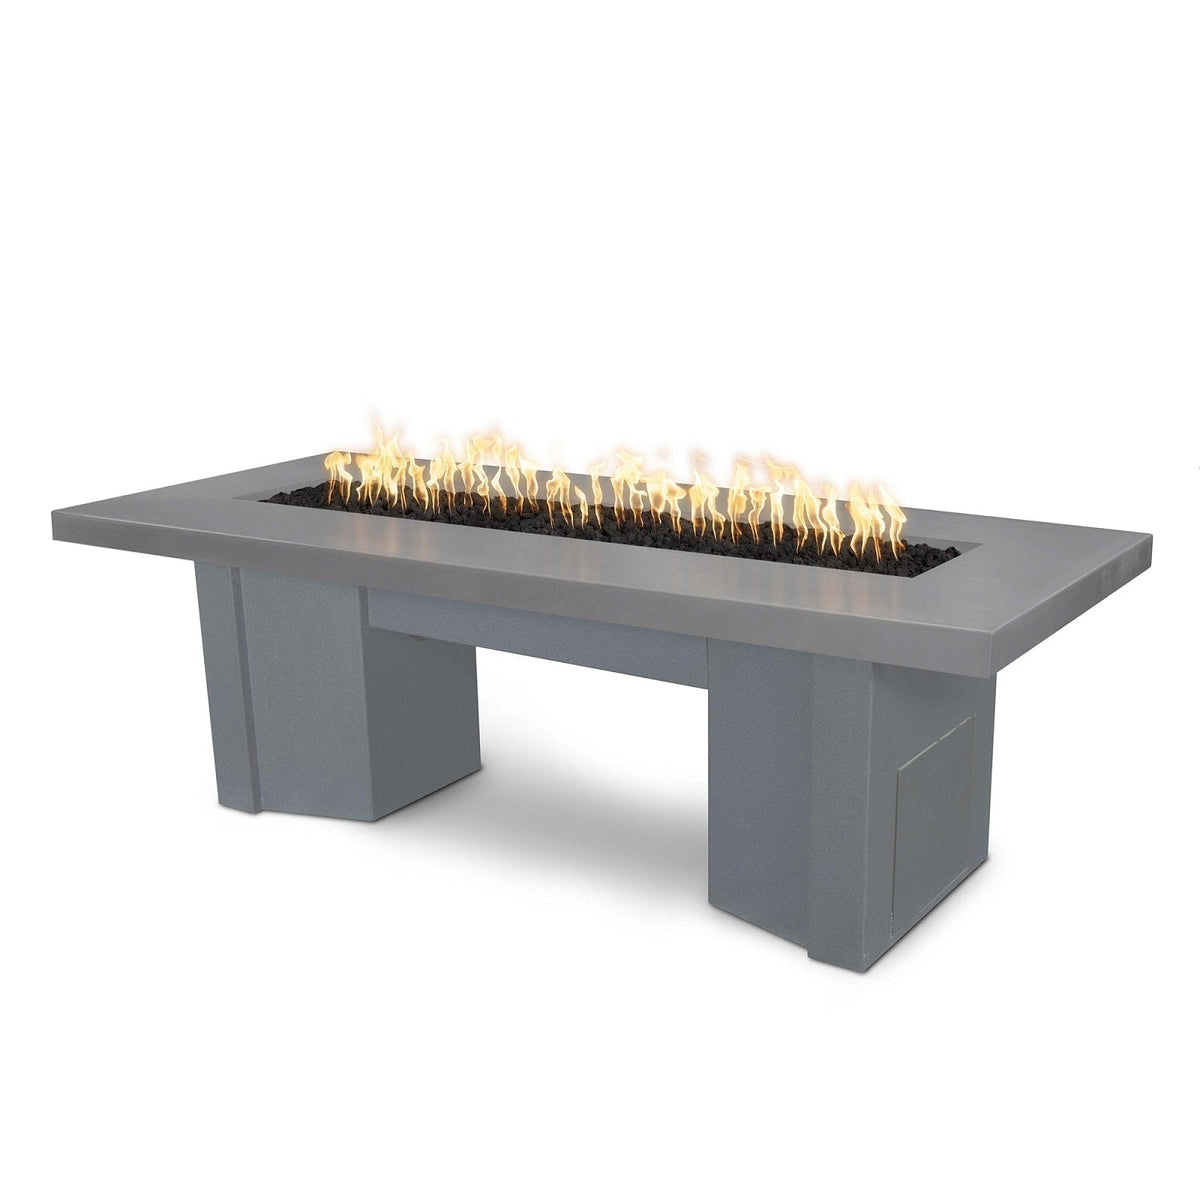 The Outdoor Plus Fire Features Natural Gray (-NGY) / Gray Powder Coated Steel (-GRY) The Outdoor Plus 60&quot; Alameda Fire Table Smooth Concrete in Liquid Propane - Match Lit with Flame Sense System / OPT-ALMGFRC60FSML-LP